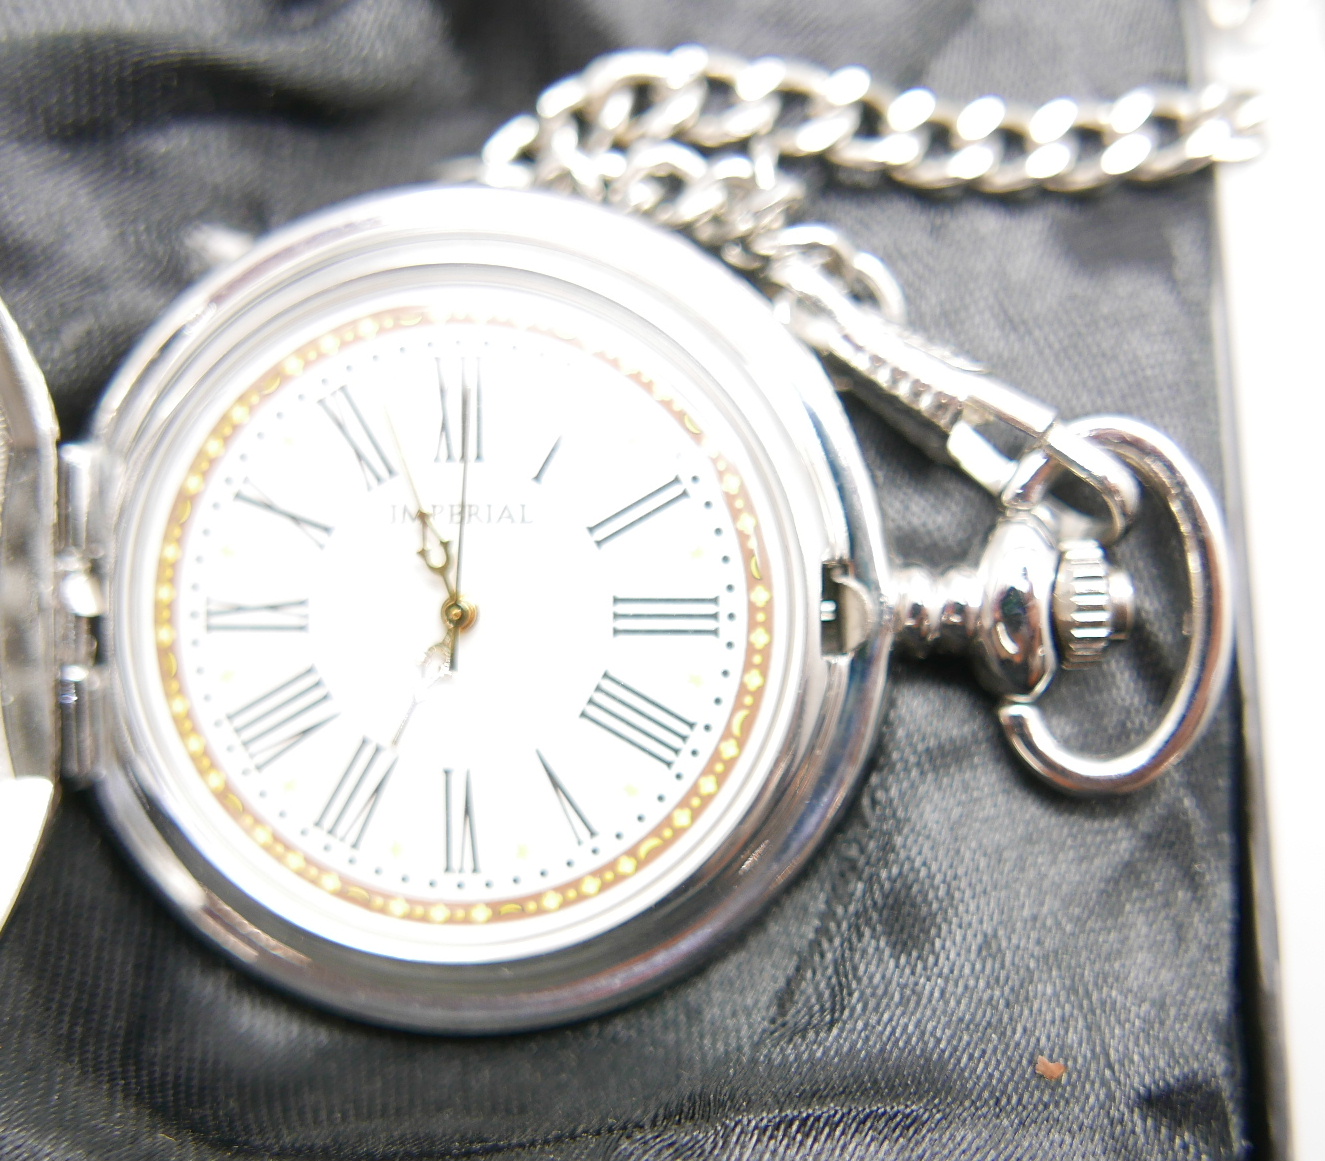 Thirty-five Atlas pocket watches including Heritage, Stobart, Glory of Steam and display case - Image 8 of 10